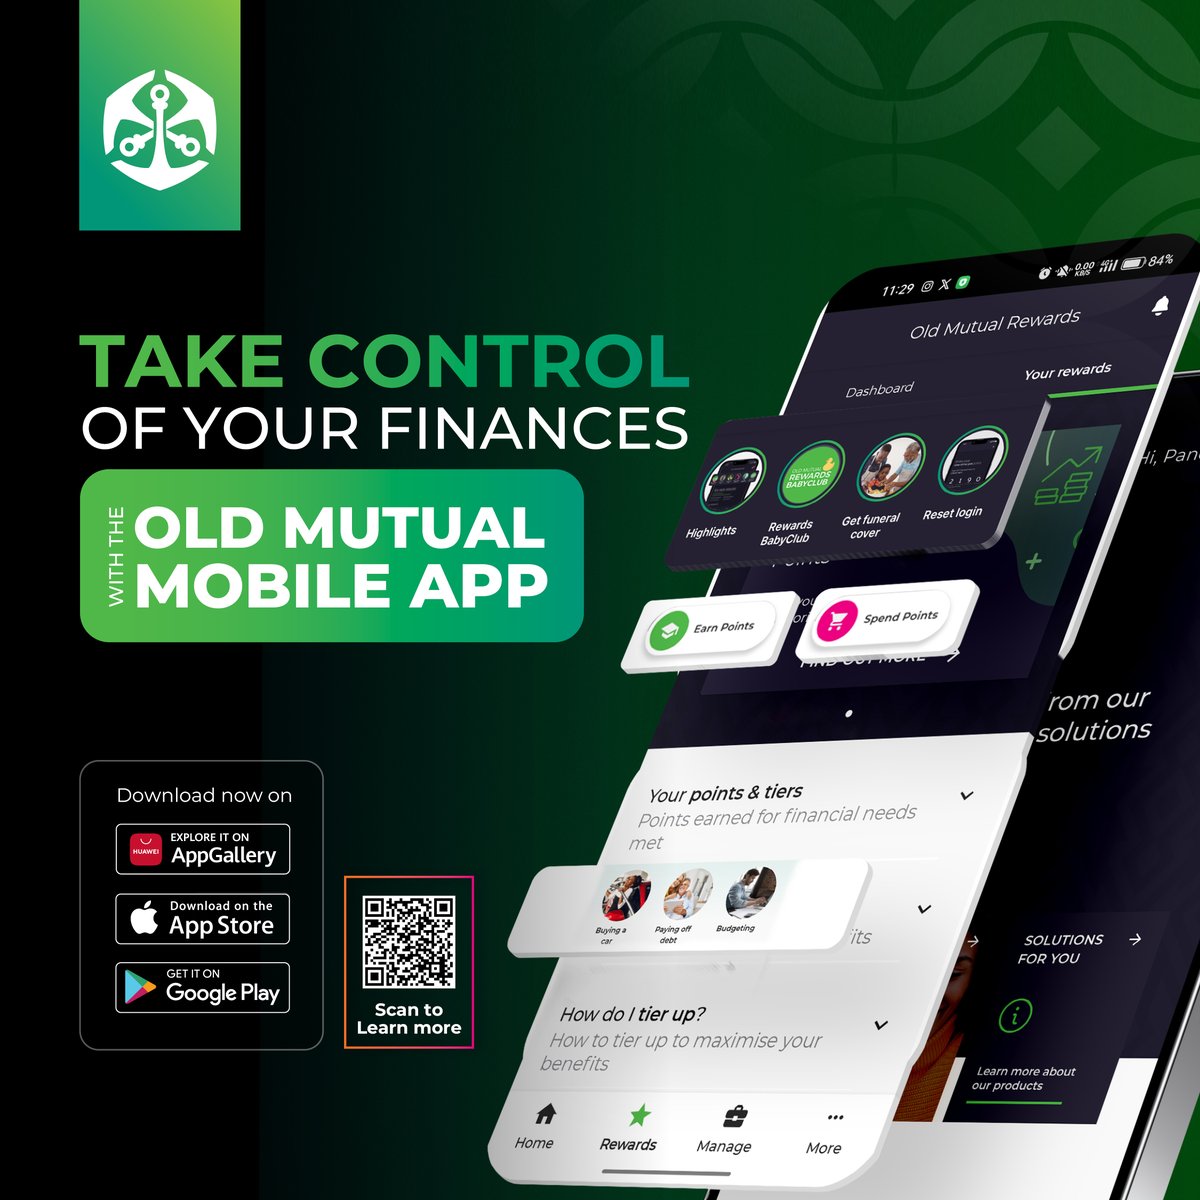 Ready to elevate your financial opportunities? The Old Mutual App unlocks a world of possibilities! Your Finances Simplified Flexible Financial Planning Finances Goal Tracker Download now at bit.ly/3UaTlW3 and embark on your journey to financial empowerment.